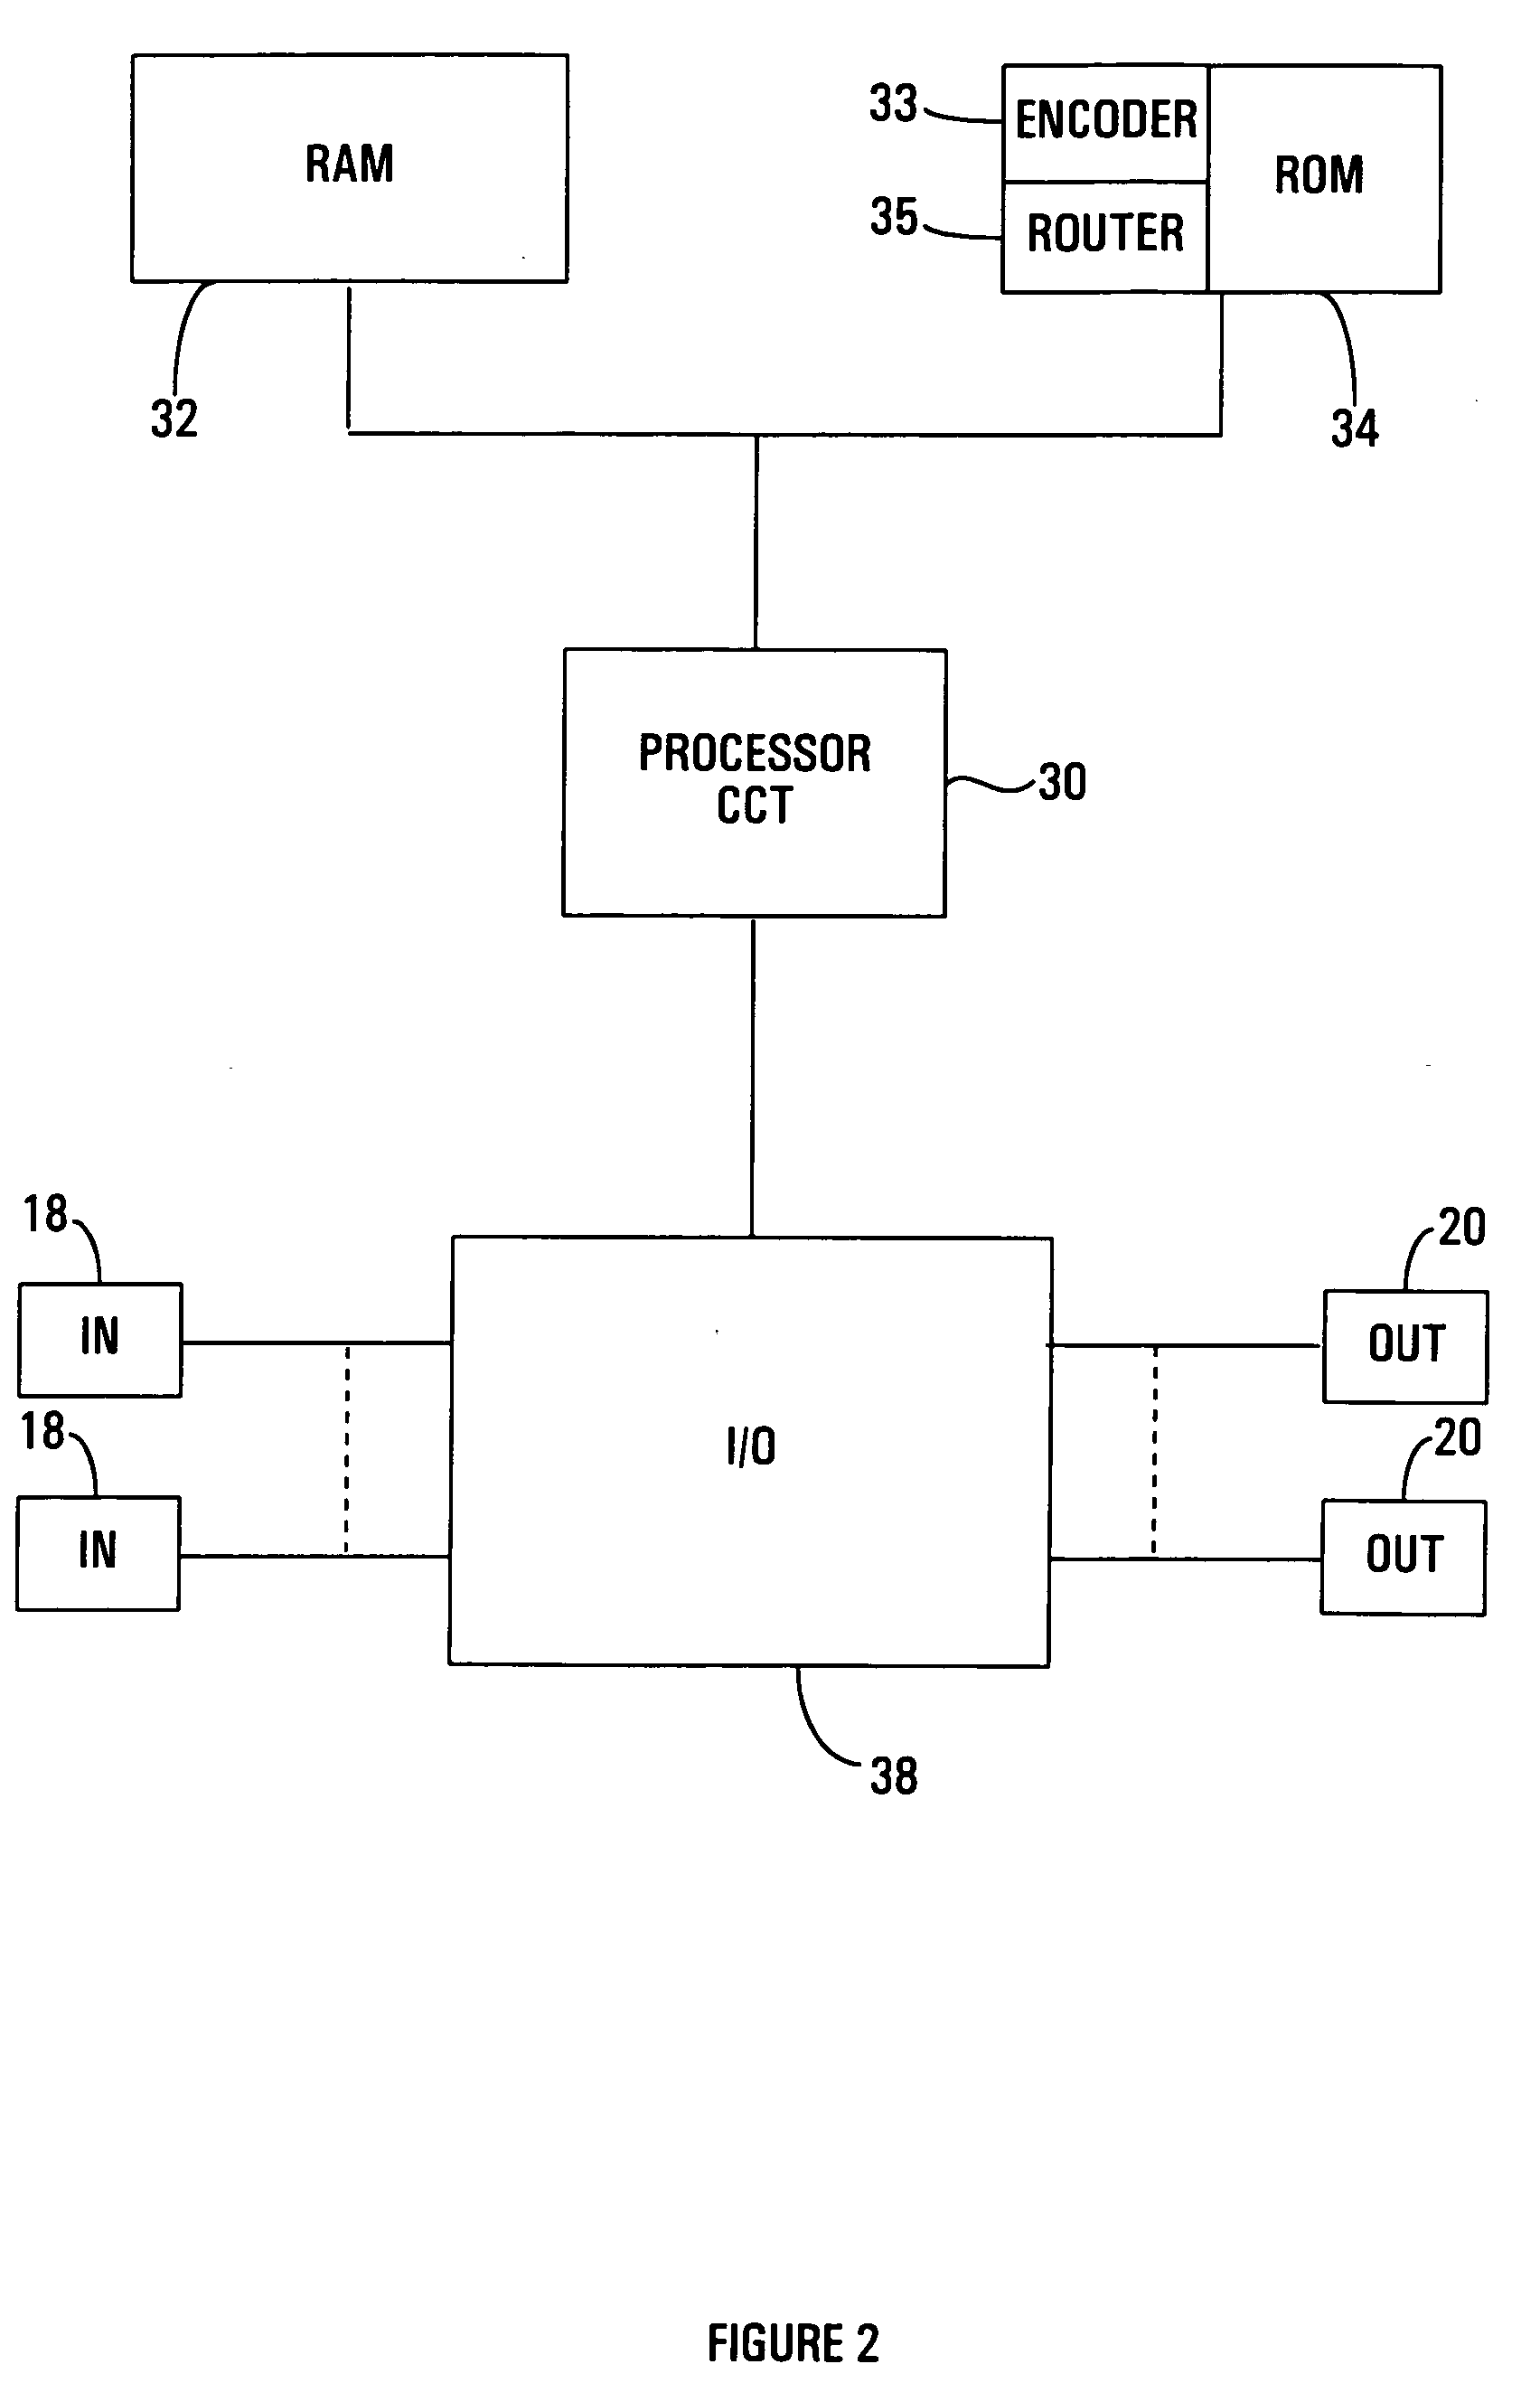 Method and apparatus for encoding a plurality of pre-defined codes into a search key and for locating a longest matching pre-defined code